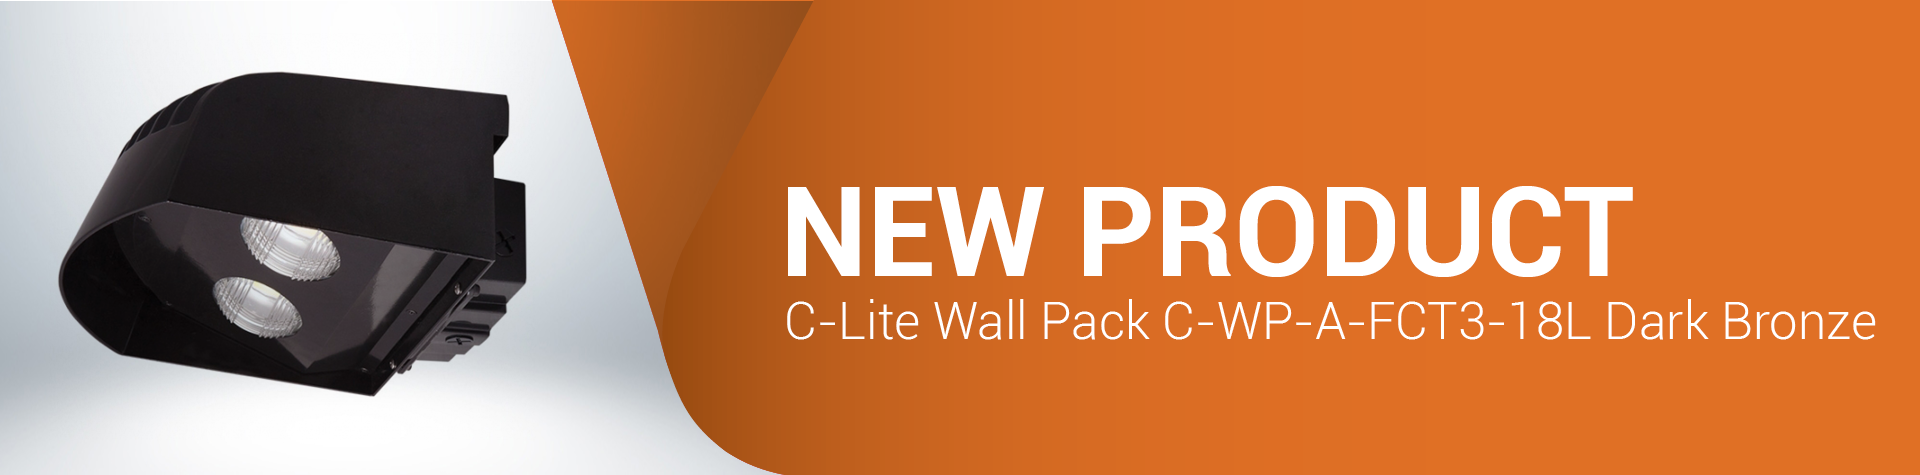 New Product- C-Lite Wall Pack